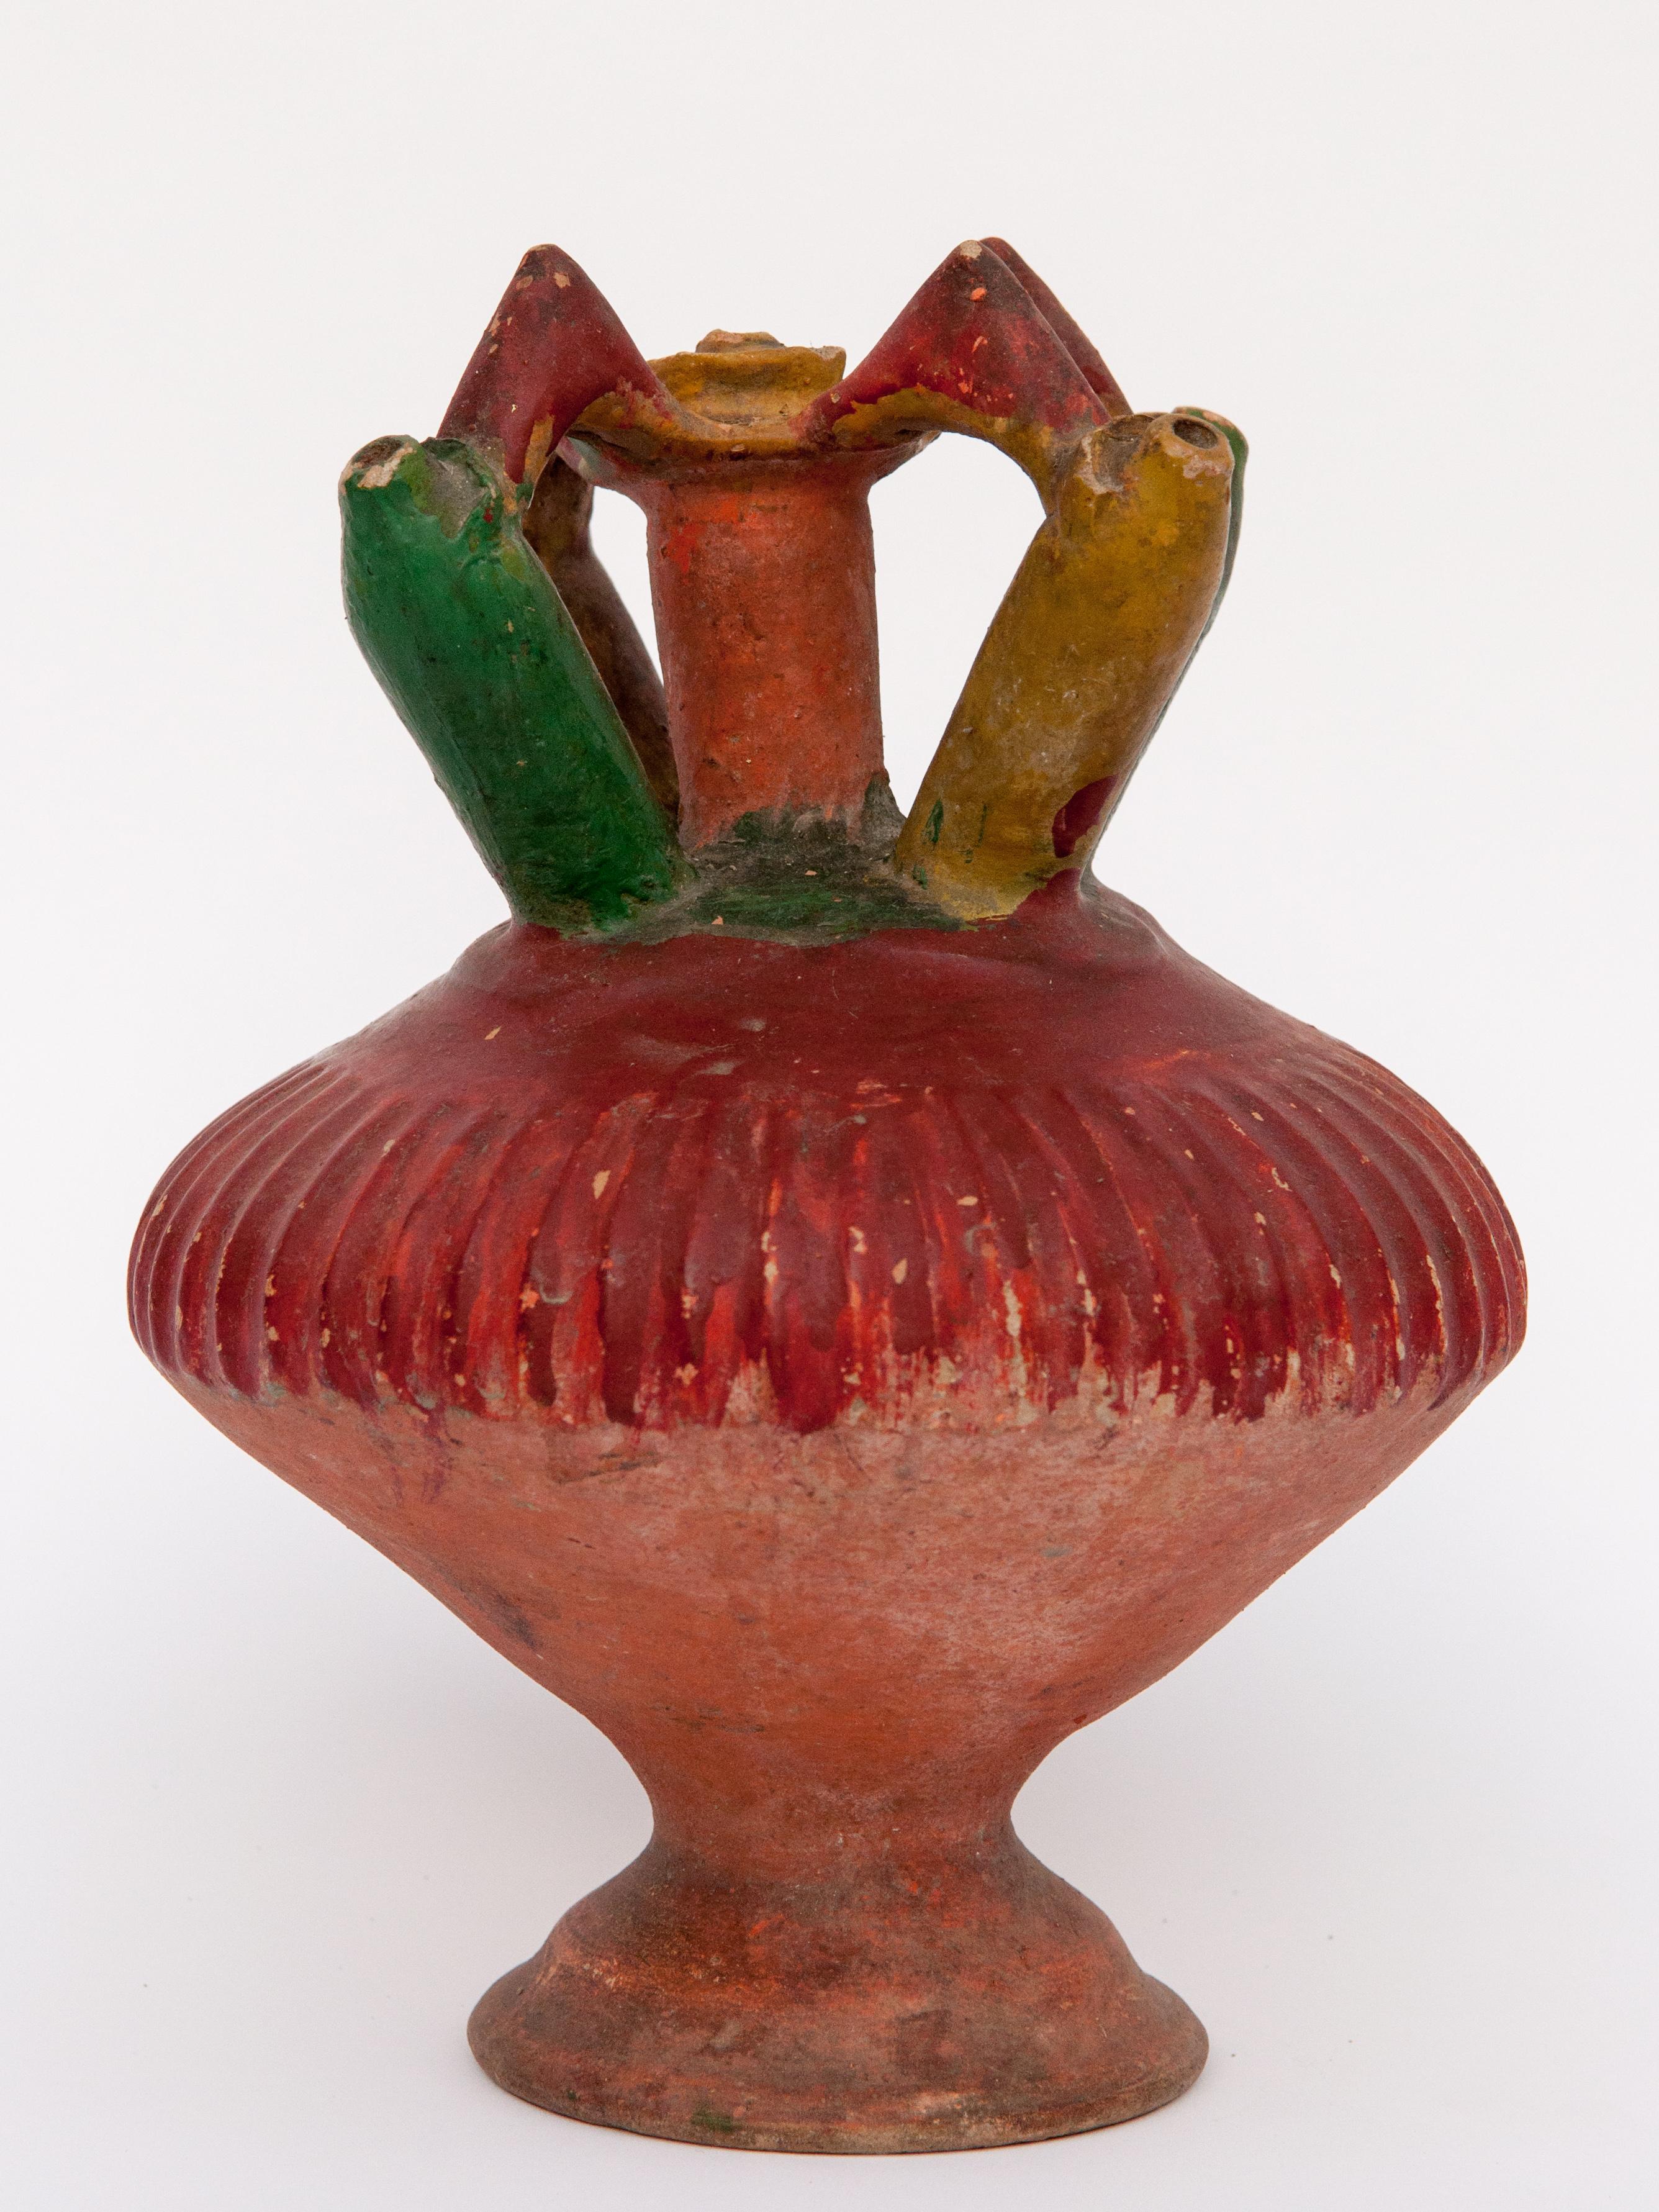 Hand-Crafted Kendi Earthenware Ritual Vessel with Original Color, Sumatra. Early 20th Century